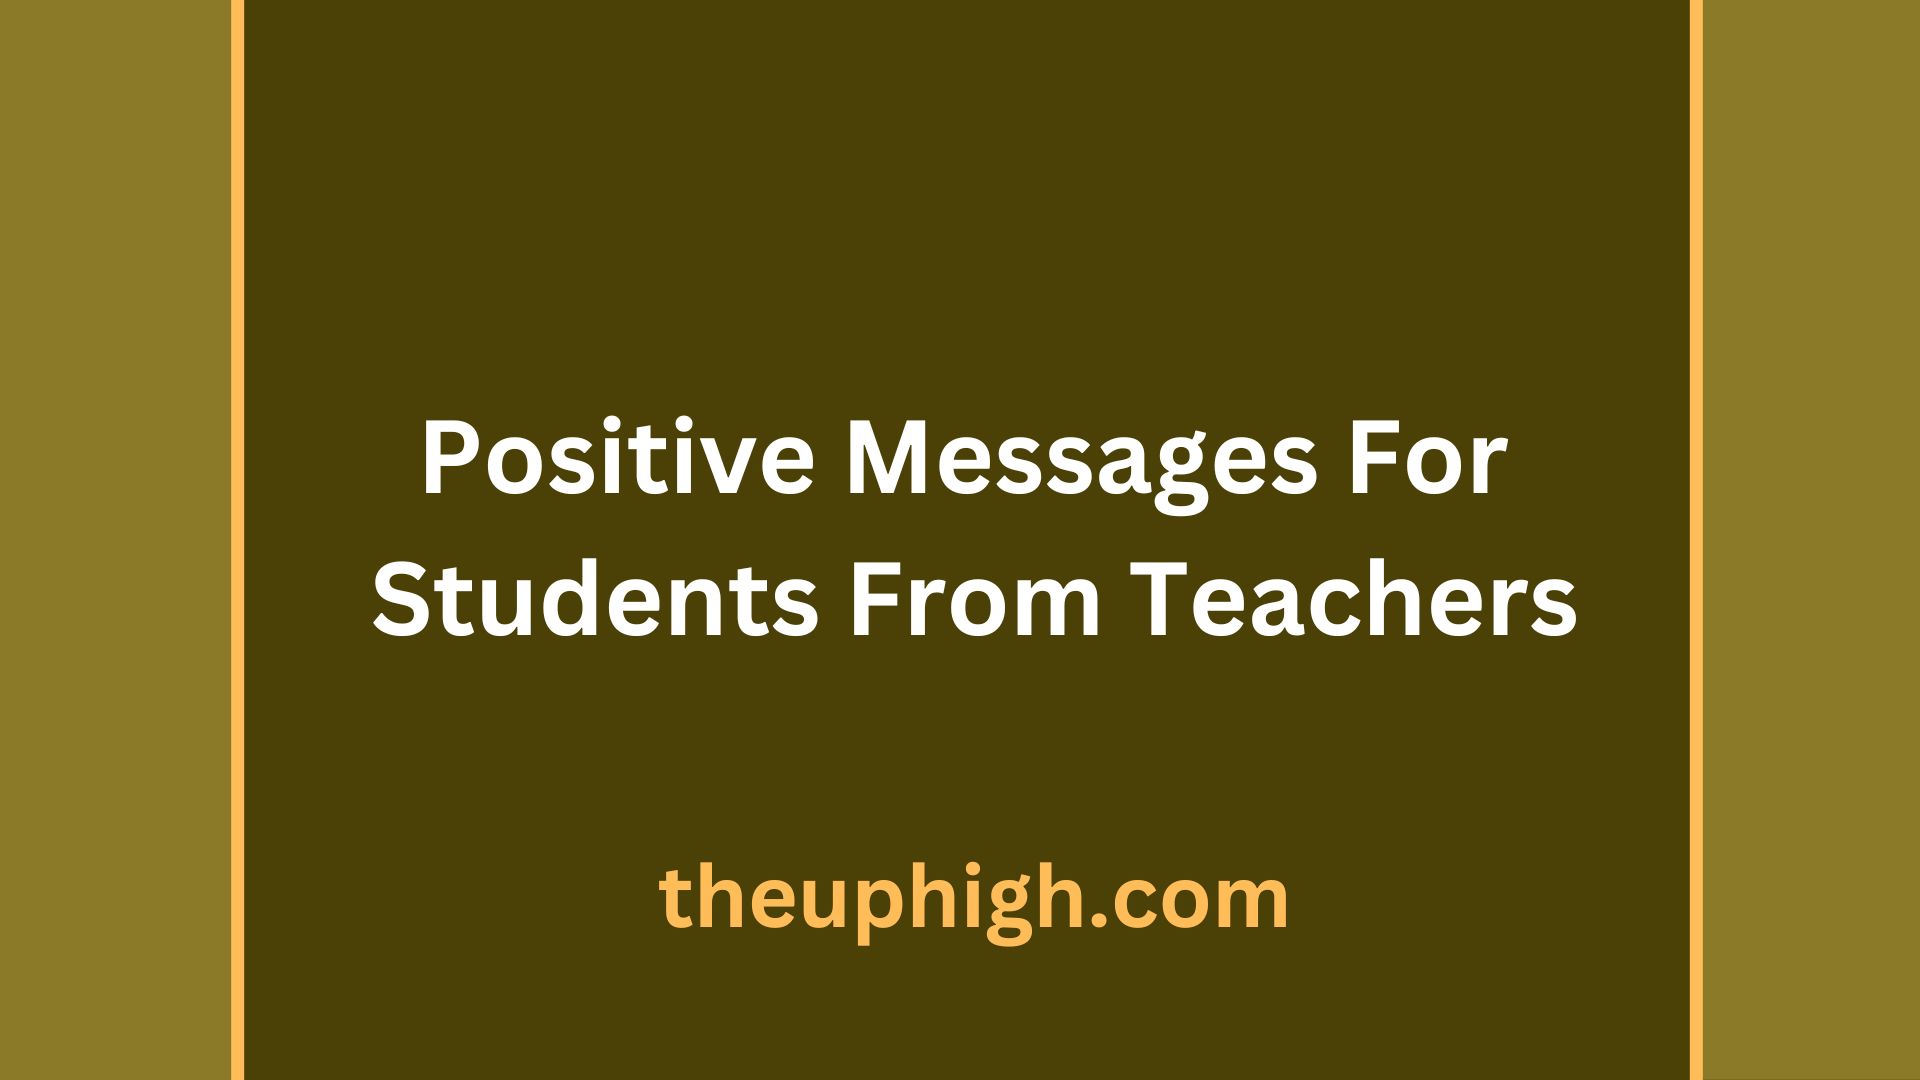 Positive Messages For Students From Teachers